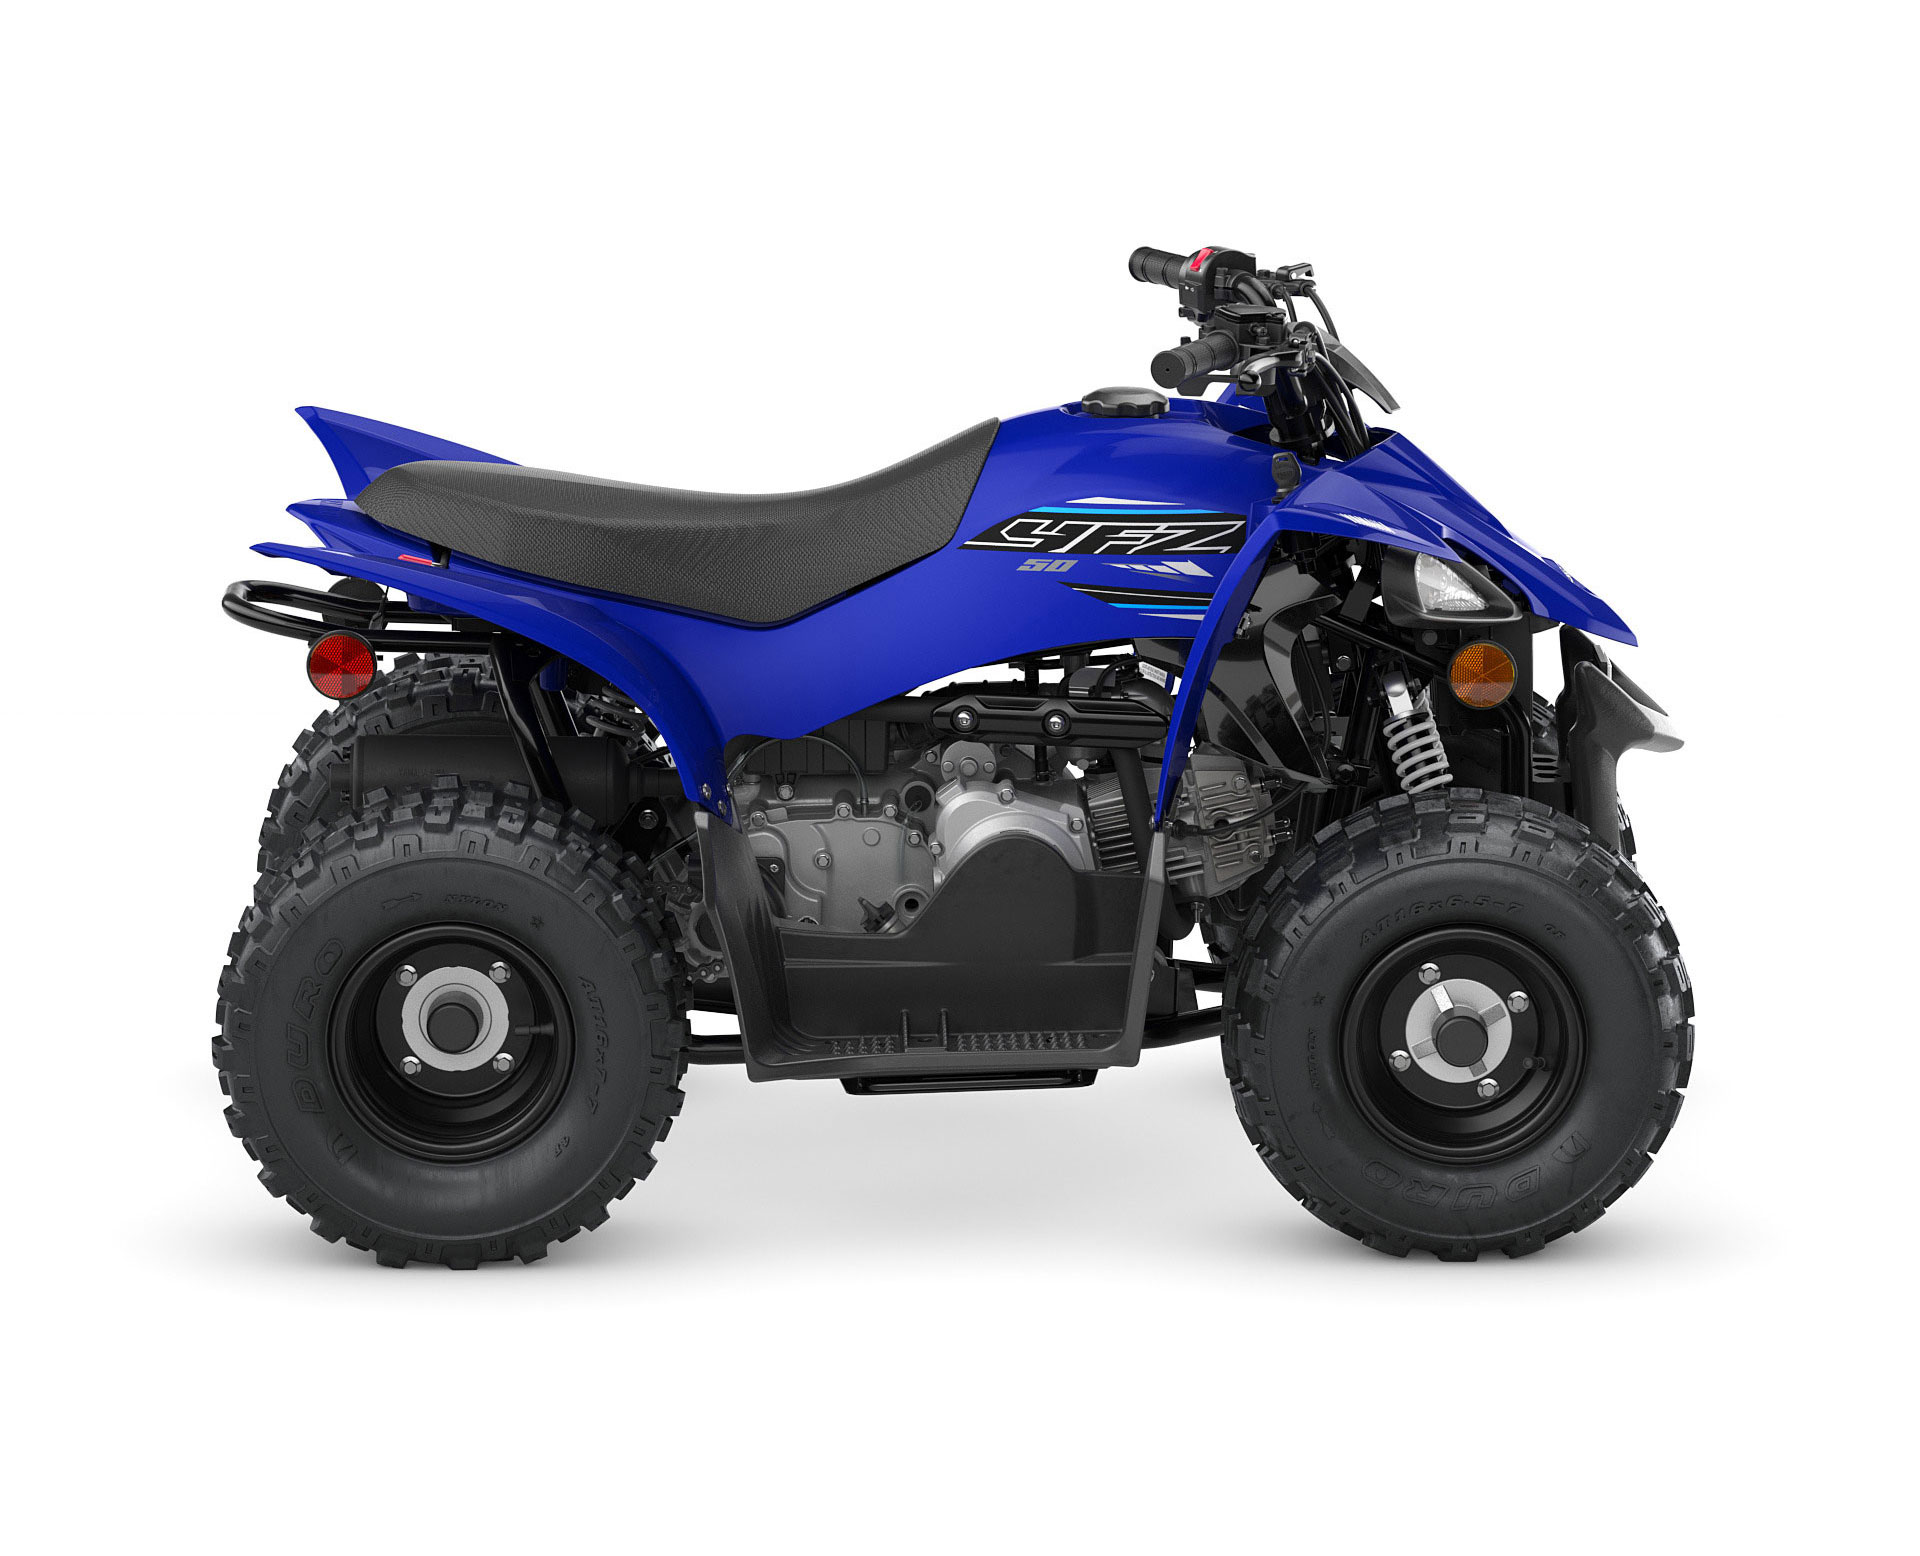 Thumbnail of your customized 2023 YFZ50